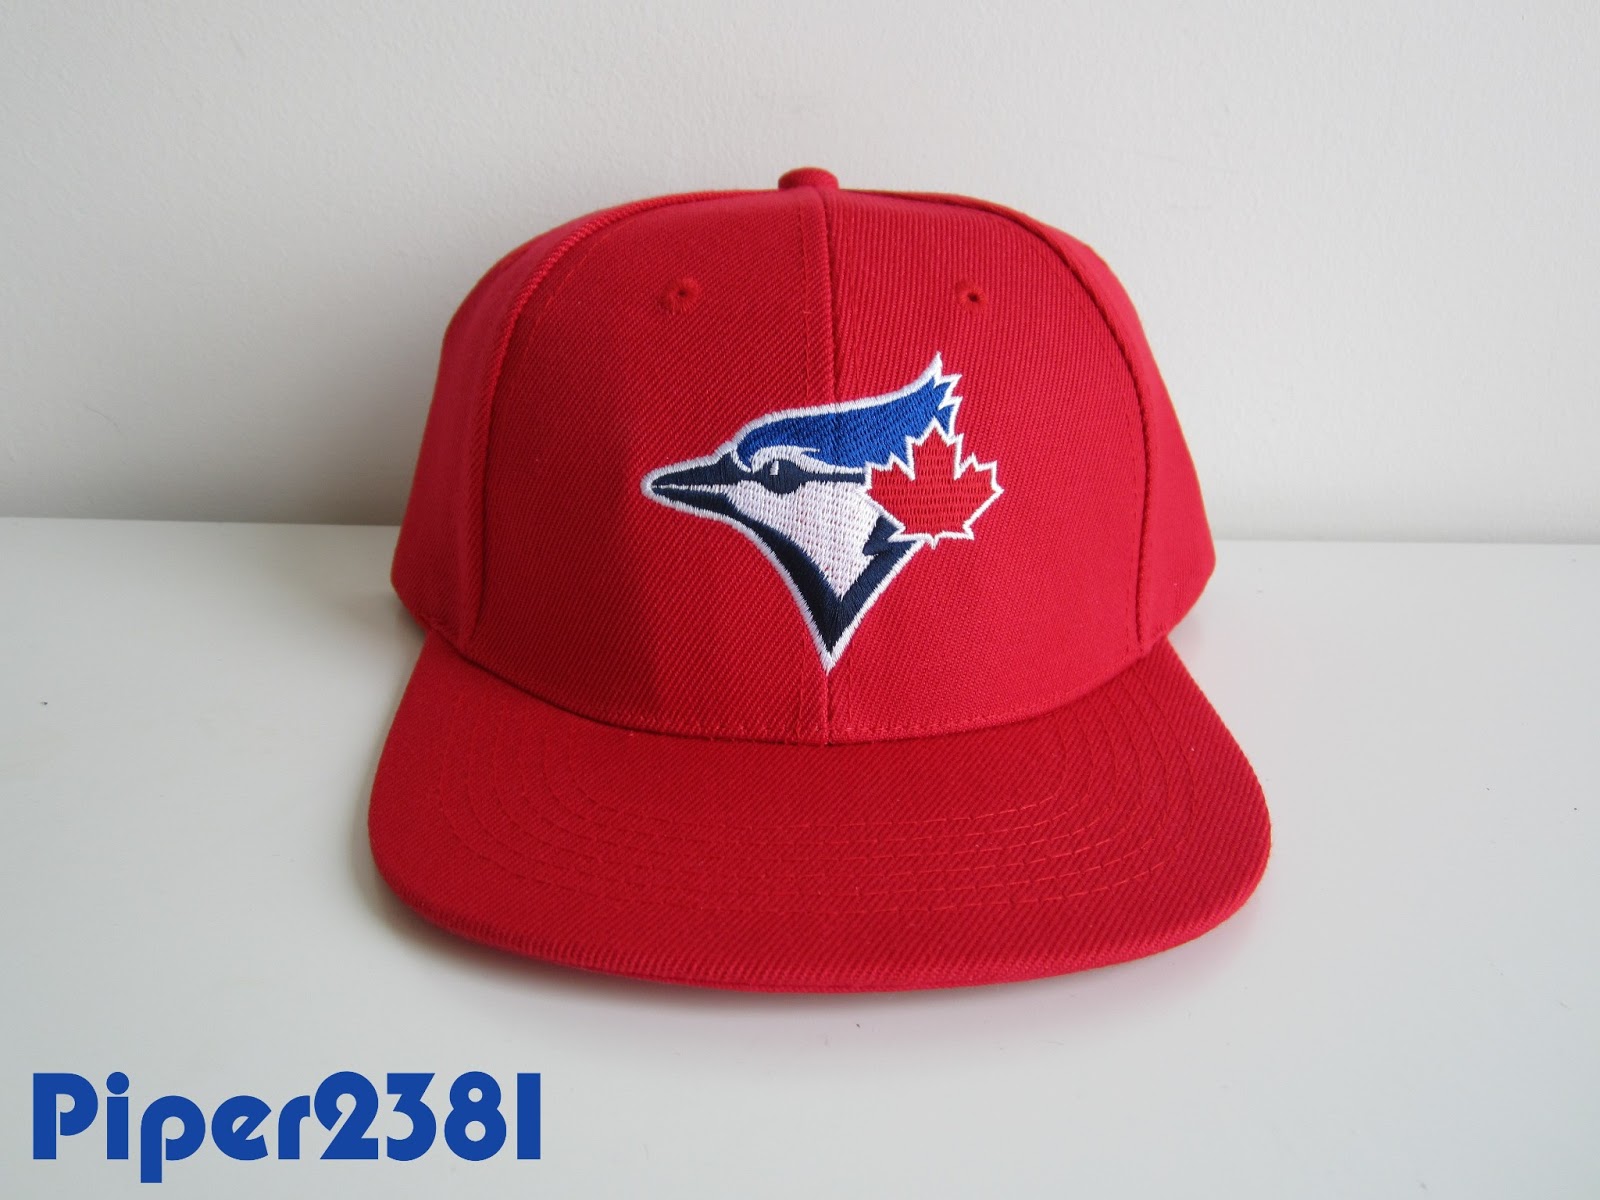 Piper2381: Canada Day 2013 Blue Jays Hat